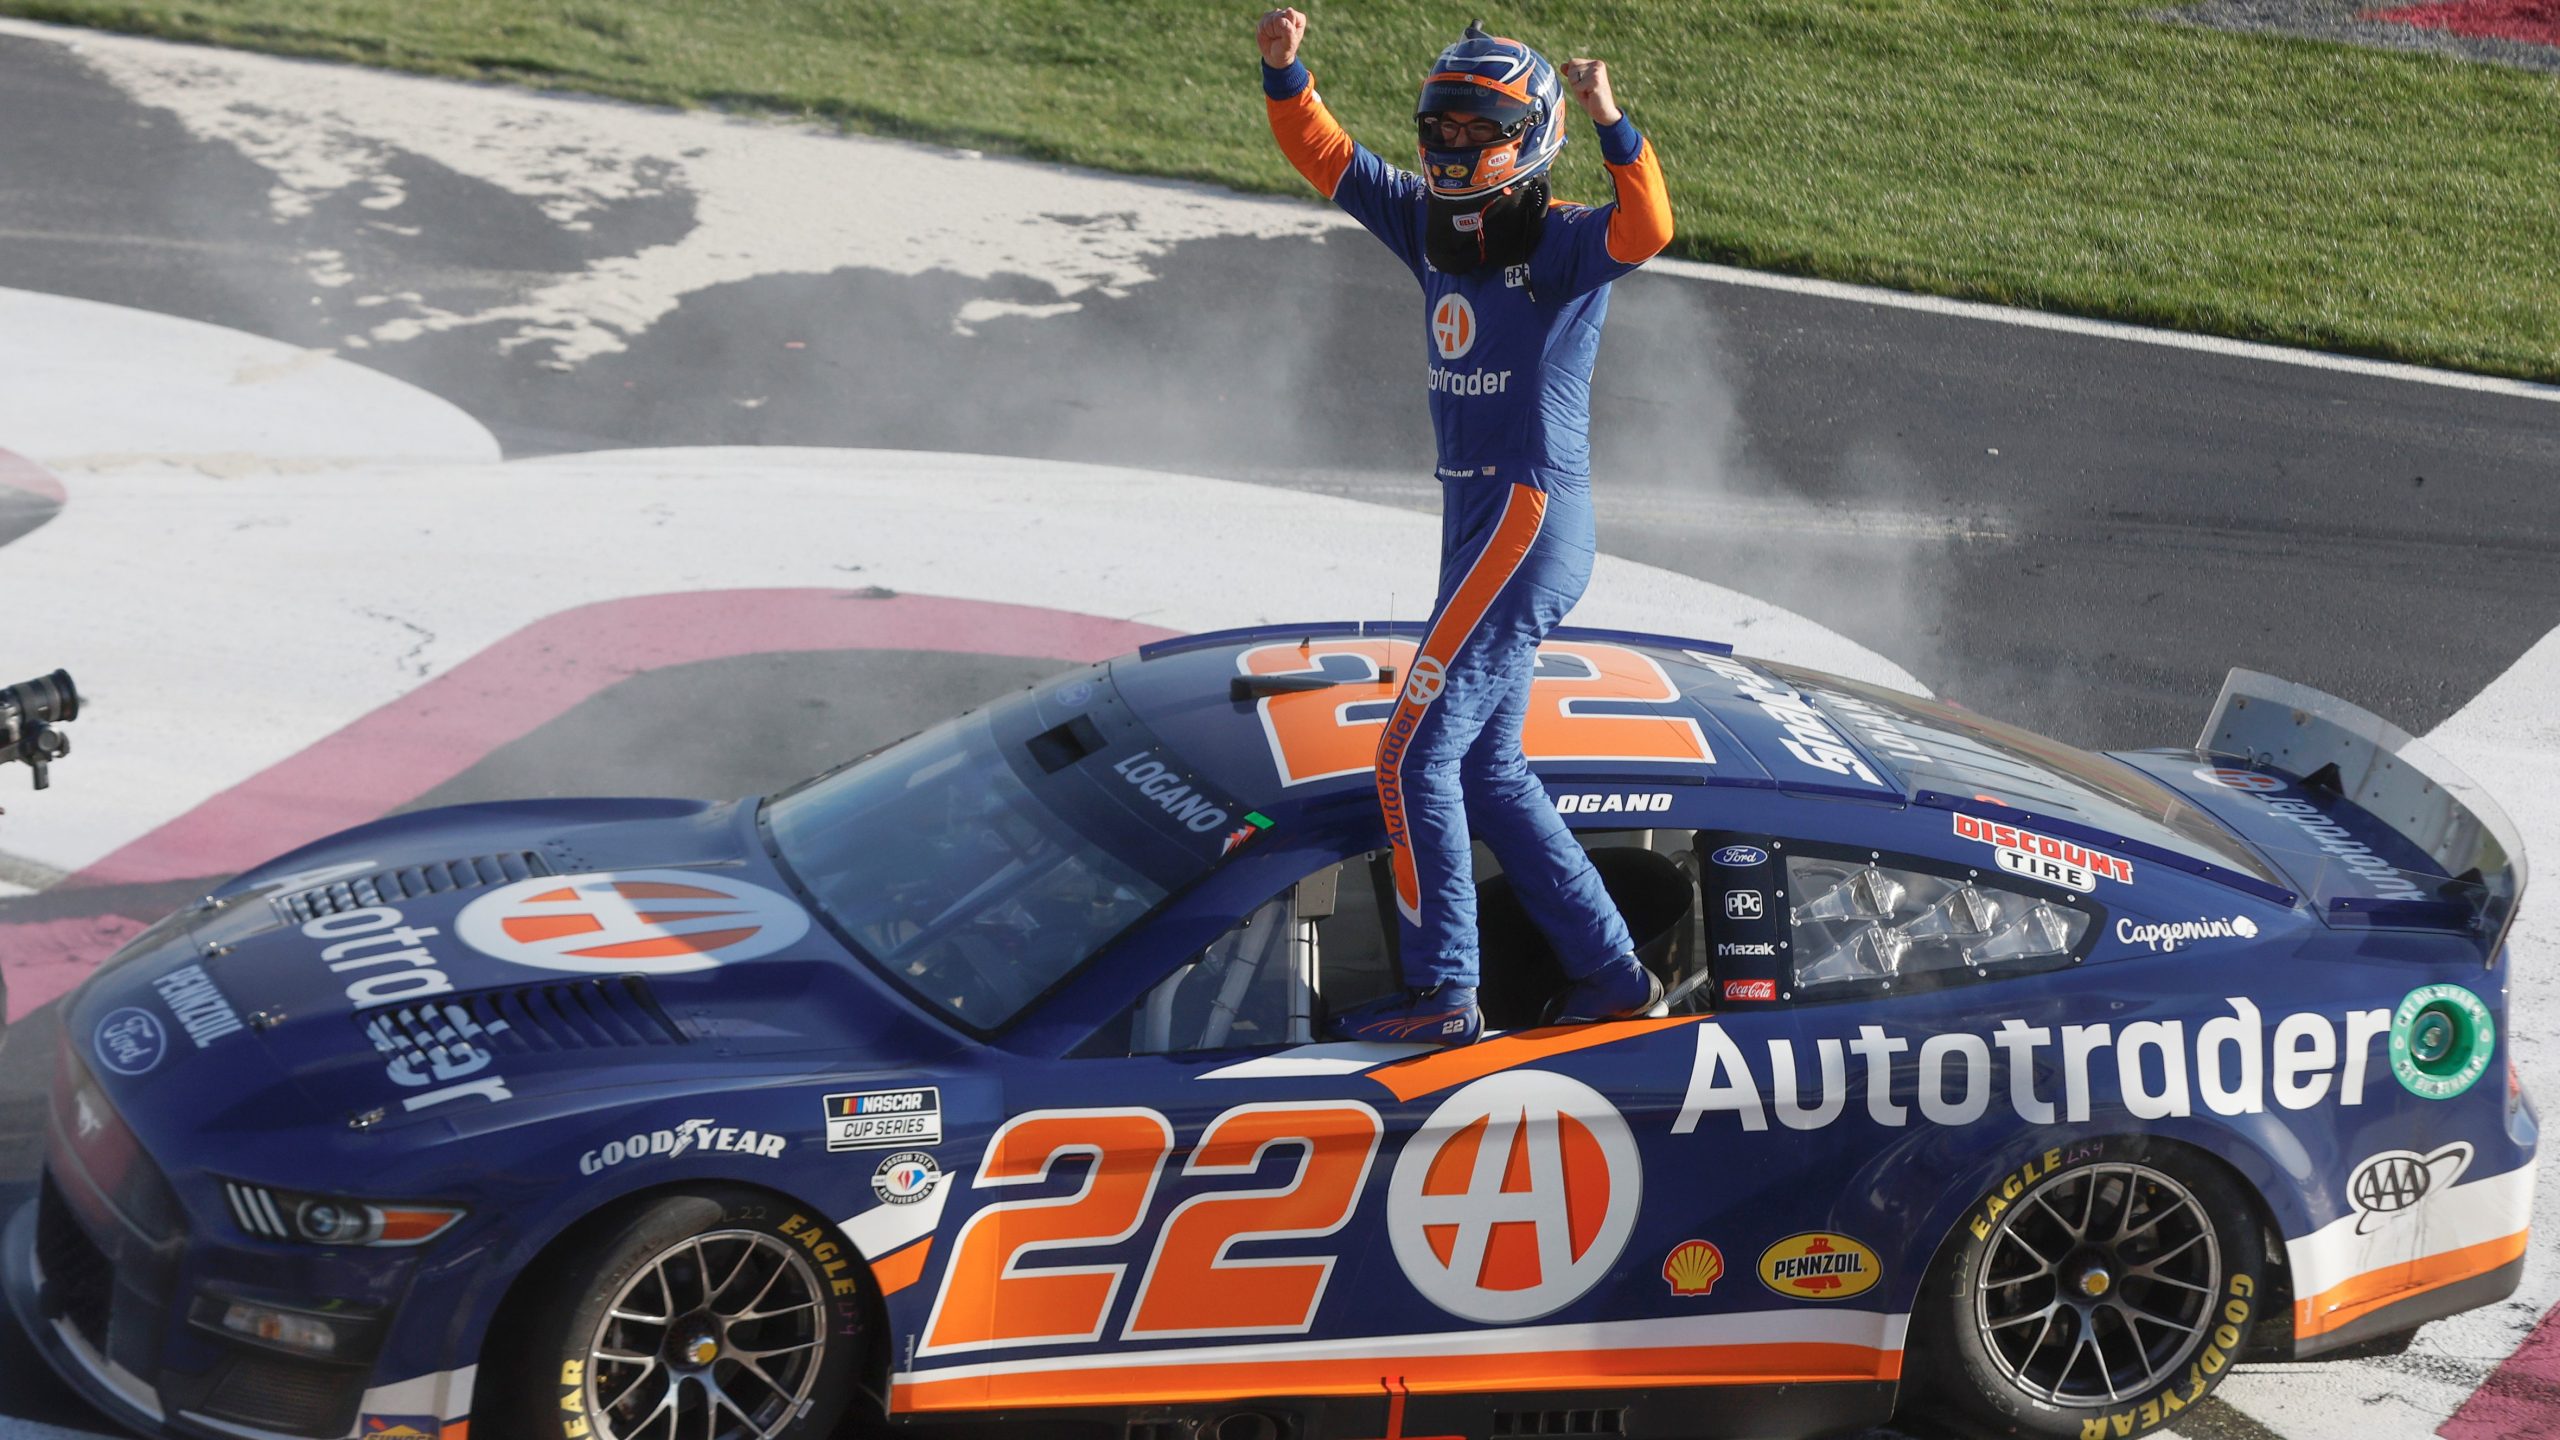 HAMPTON, GEORGIA - MARCH 19: Joey Logano, driver of the #22 Autotrader Ford, celebrates after winning the NASCAR Cup Series Ambetter Health 400 at Atlanta Motor Speedway on March 19, 2023 in Hampton, Georgia. (Photo by Sean Gardner/Getty Images)